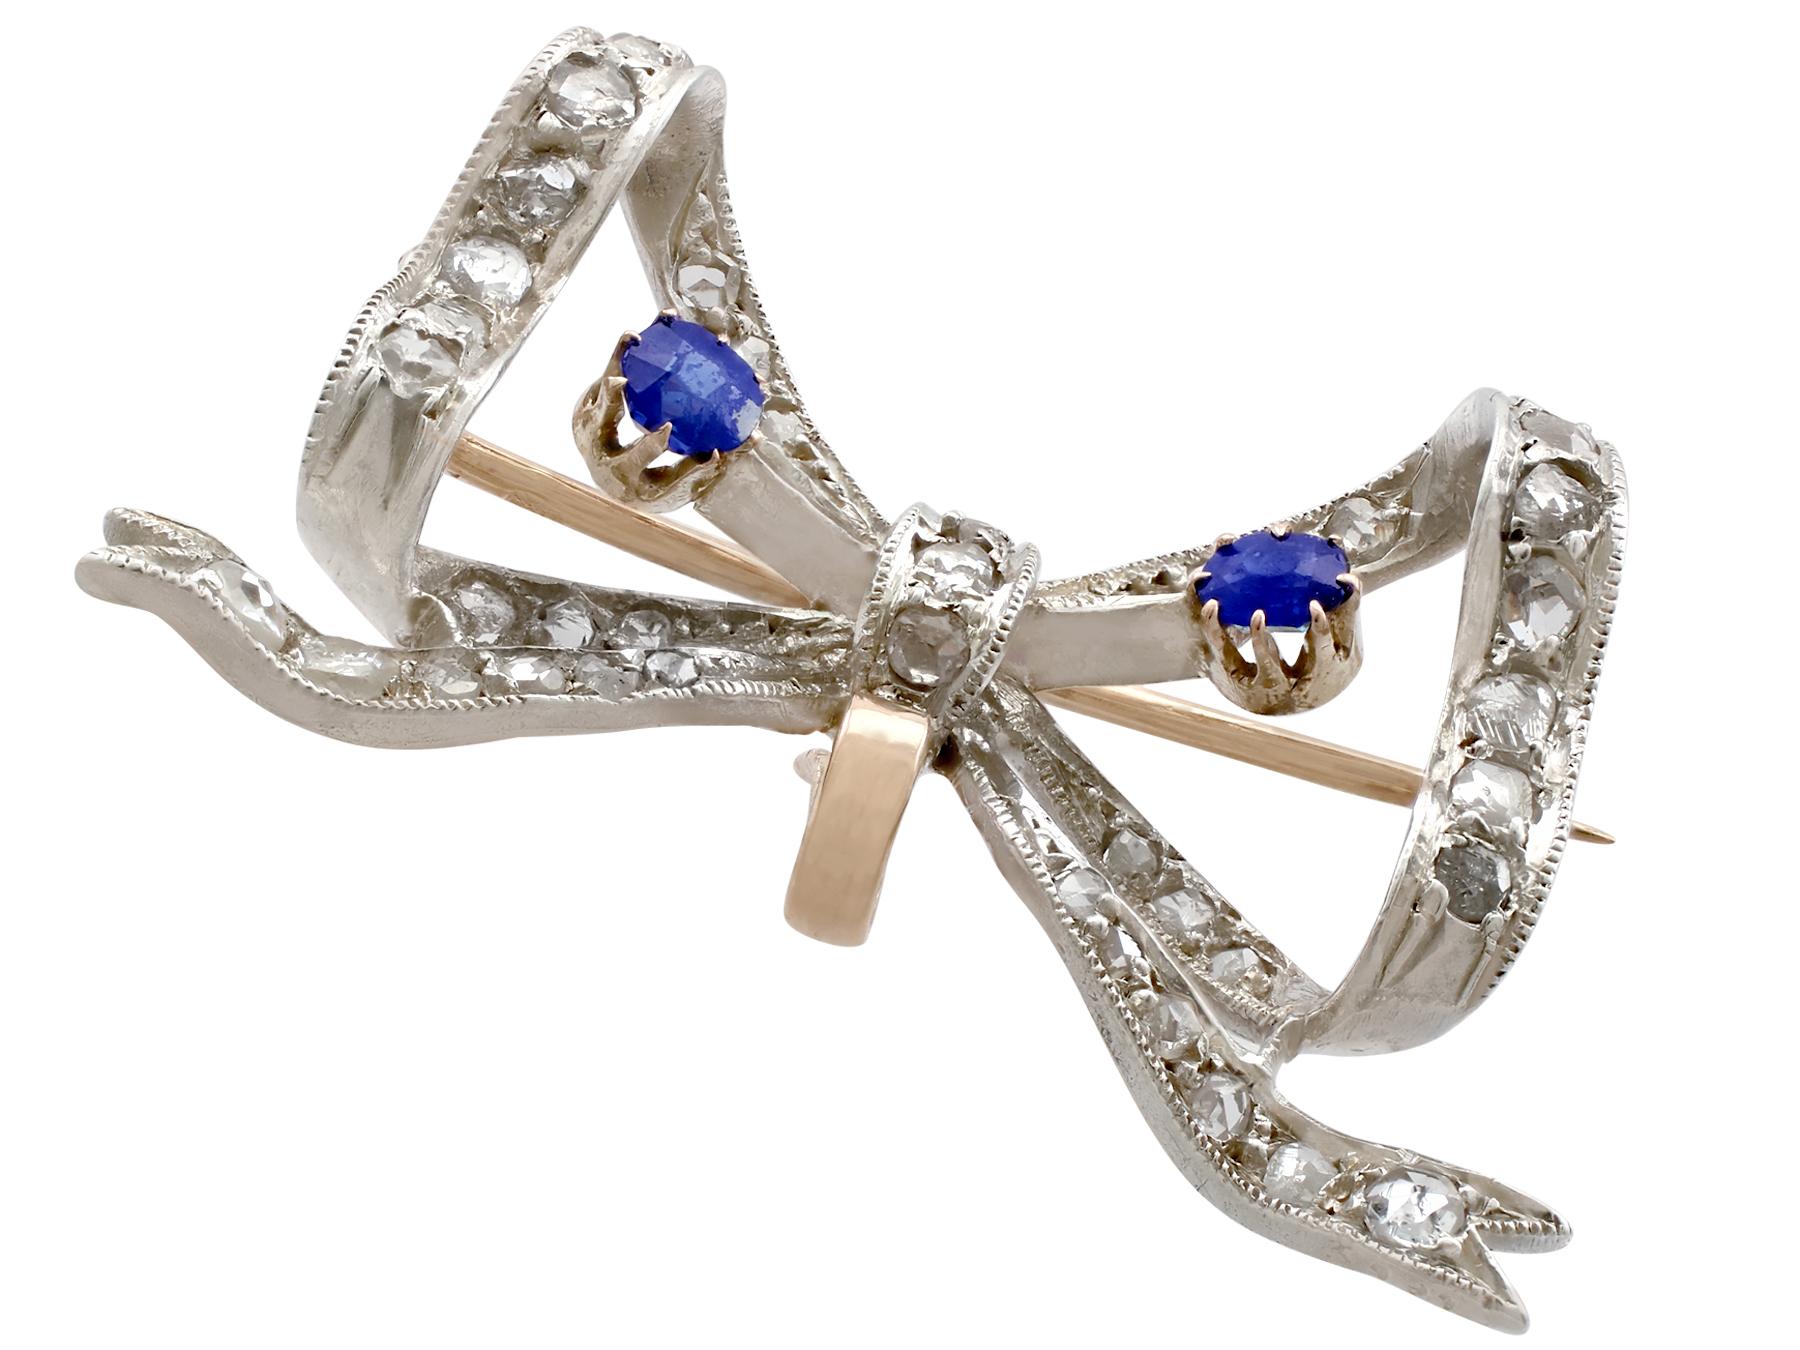 An impressive antique French 0.45 carat sapphire and 0.93 carat diamond, 15 karat yellow gold and silver set brooch; part of our diverse antique jewelry and estate jewelry collections.

This fine and impressive antique bow brooch has been crafted in